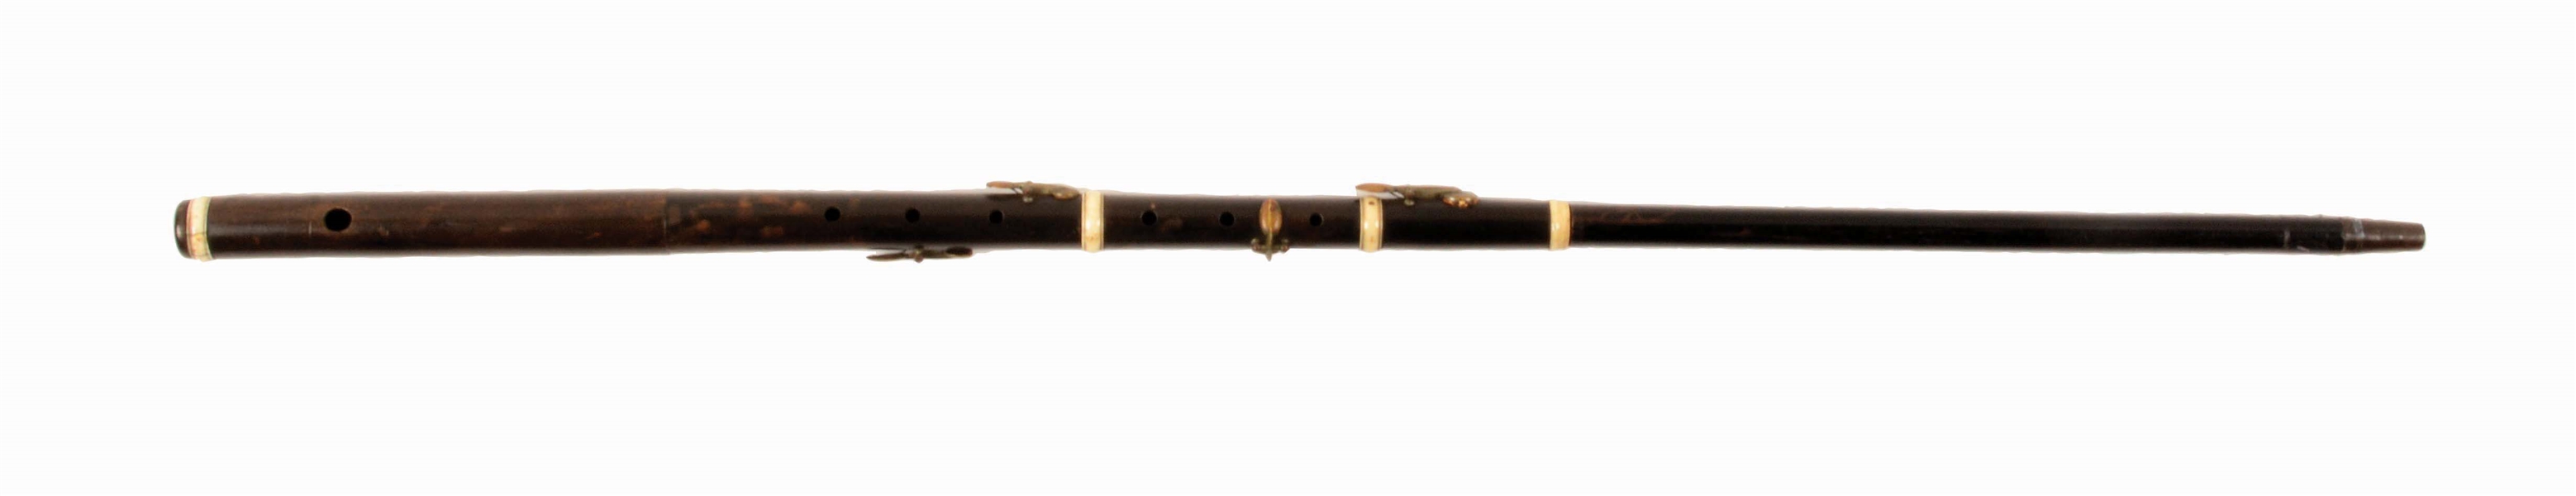 FLUTE CANE SWORD CANE WITH IVORY FINDINGS AND SWORD INSIDE.